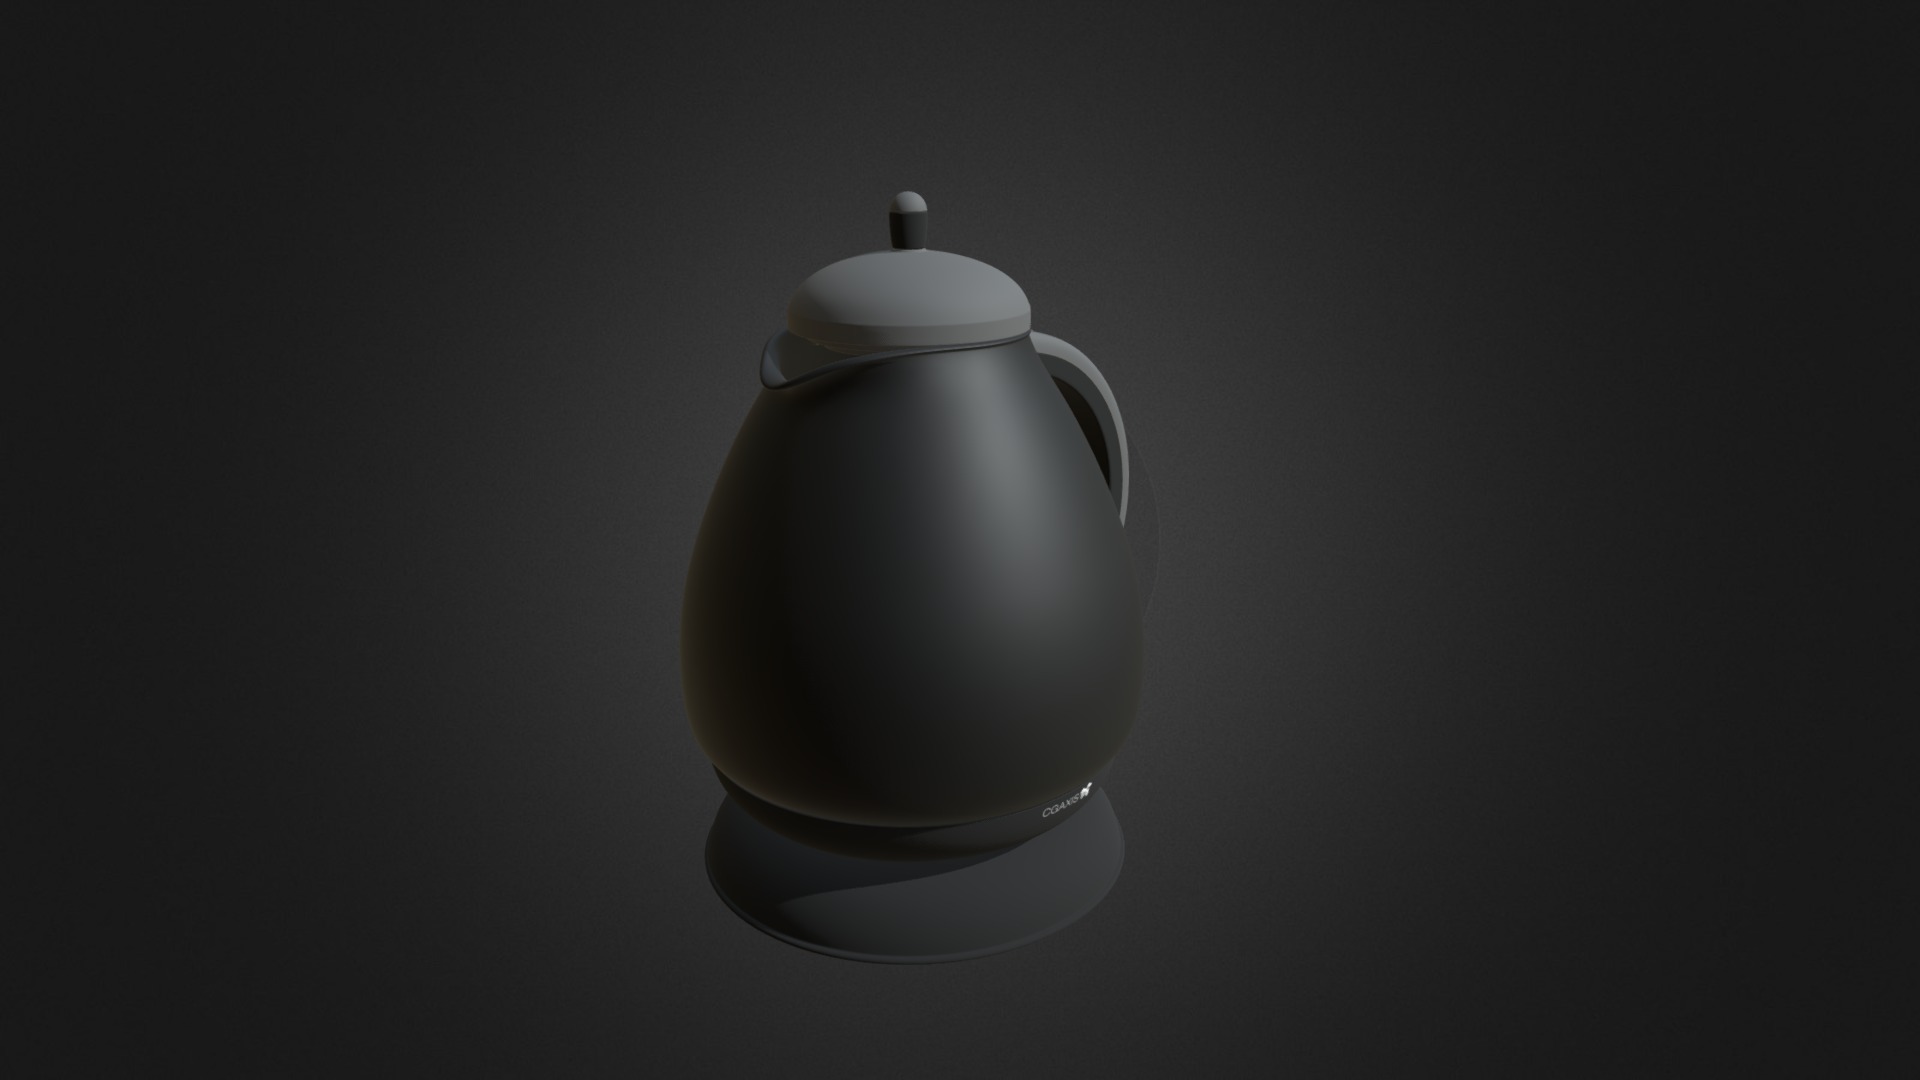 3D model Electric Kettle - This is a 3D model of the Electric Kettle. The 3D model is about a white and black teapot.